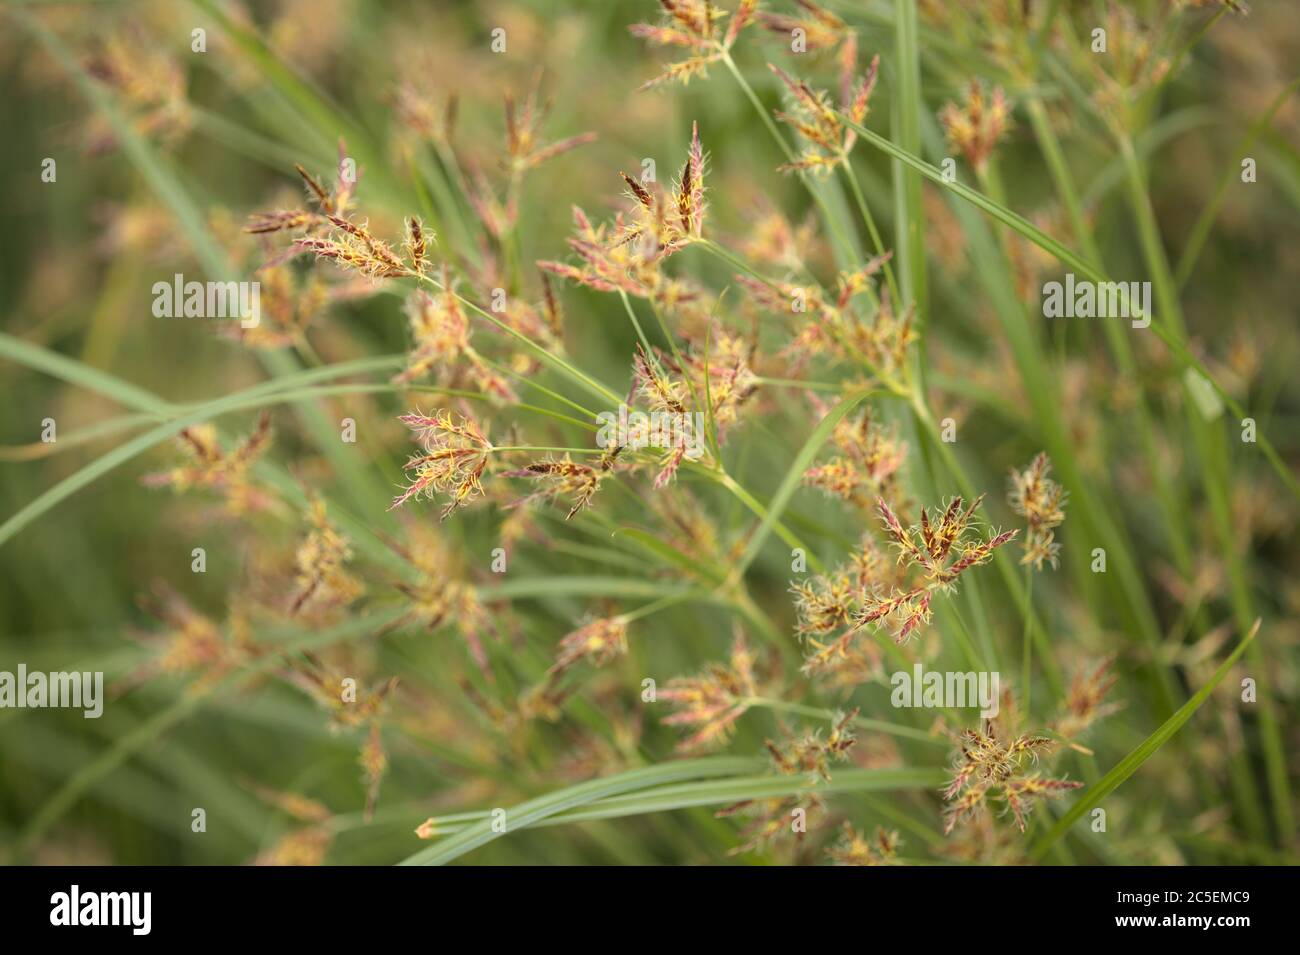 Macro floral background with sedge grasses Stock Photo